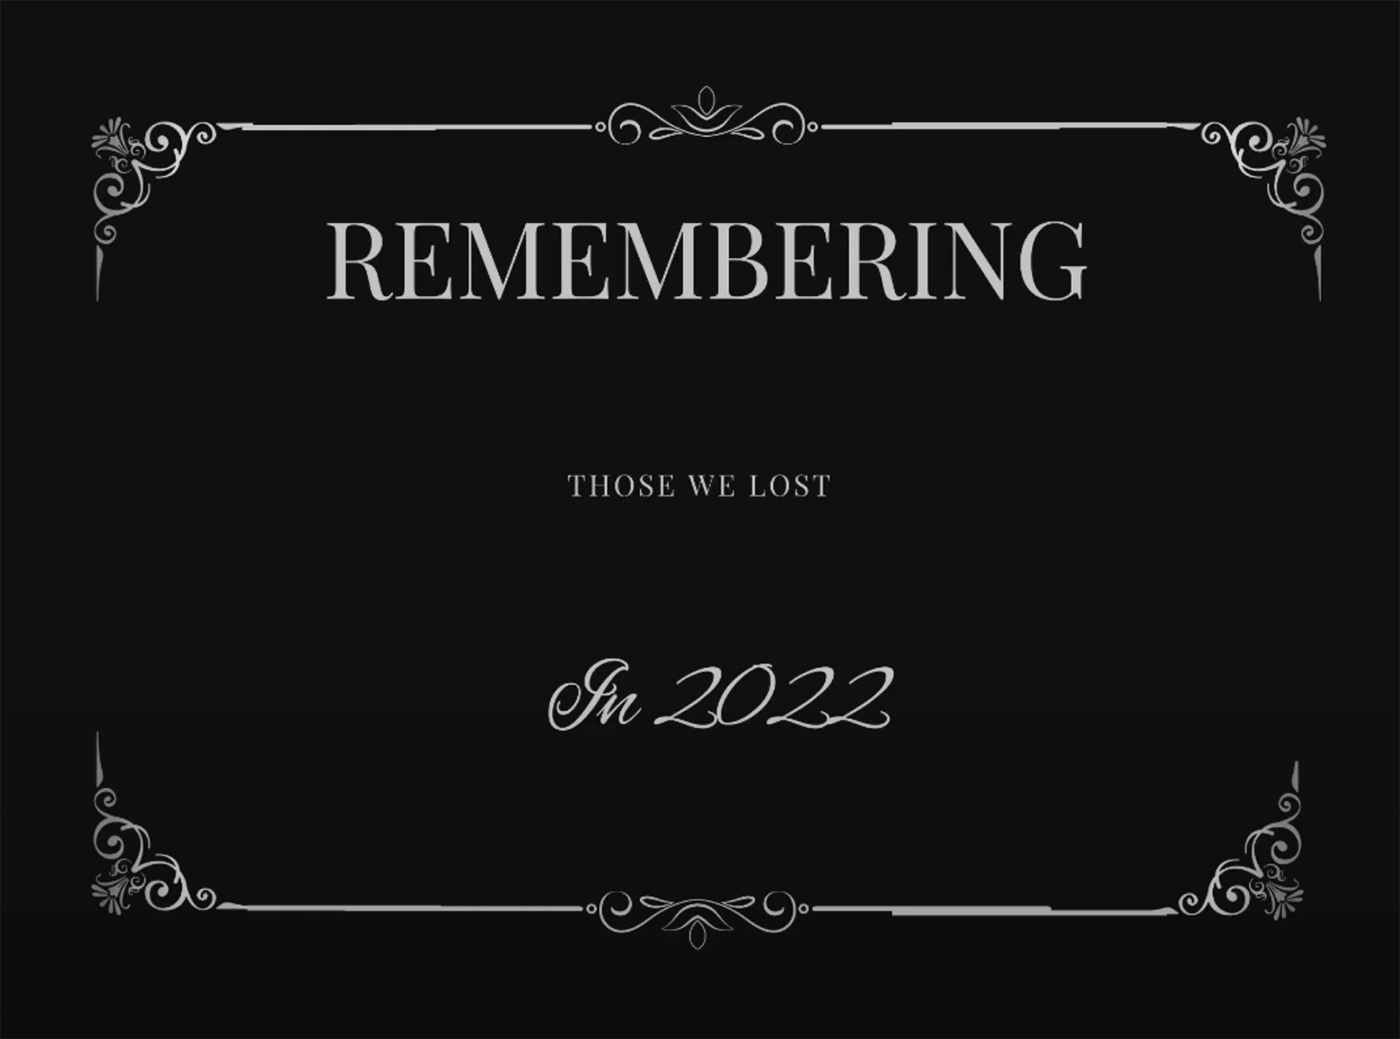 In Memoriam: To the games we lost in 2022